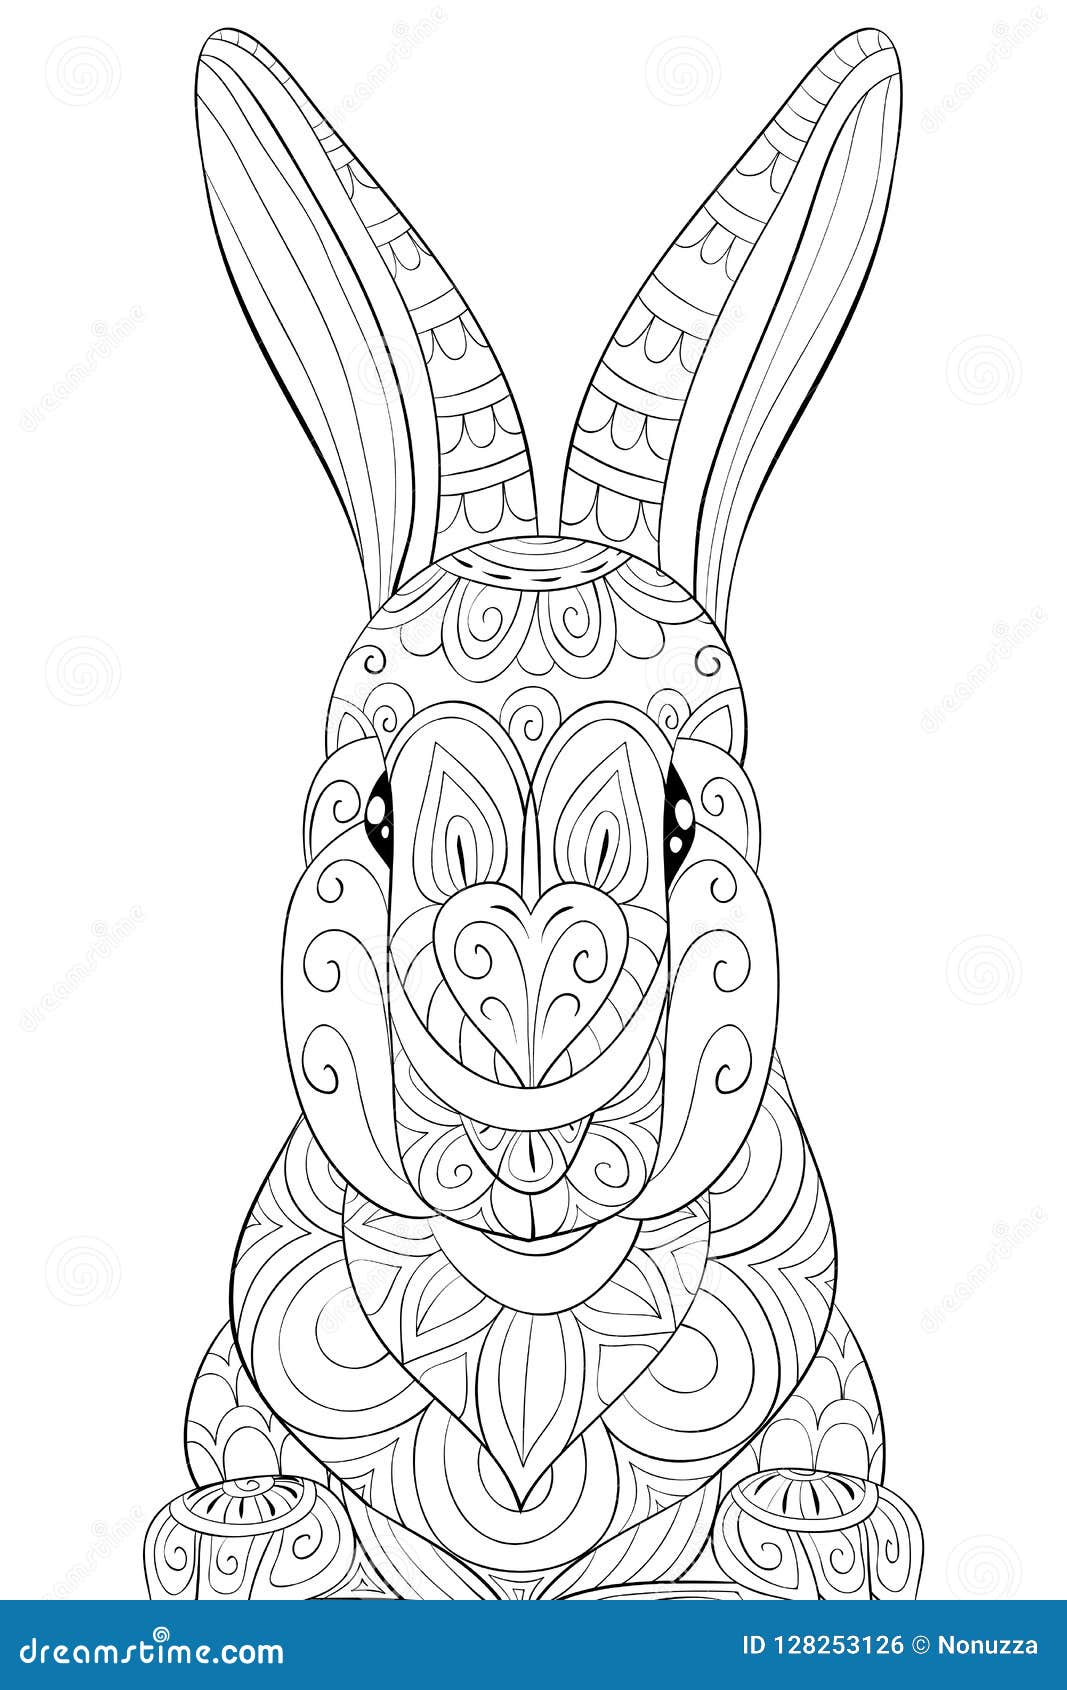 Download Adult Coloring Book,page A Cute Rabbit Image For Relaxing ...